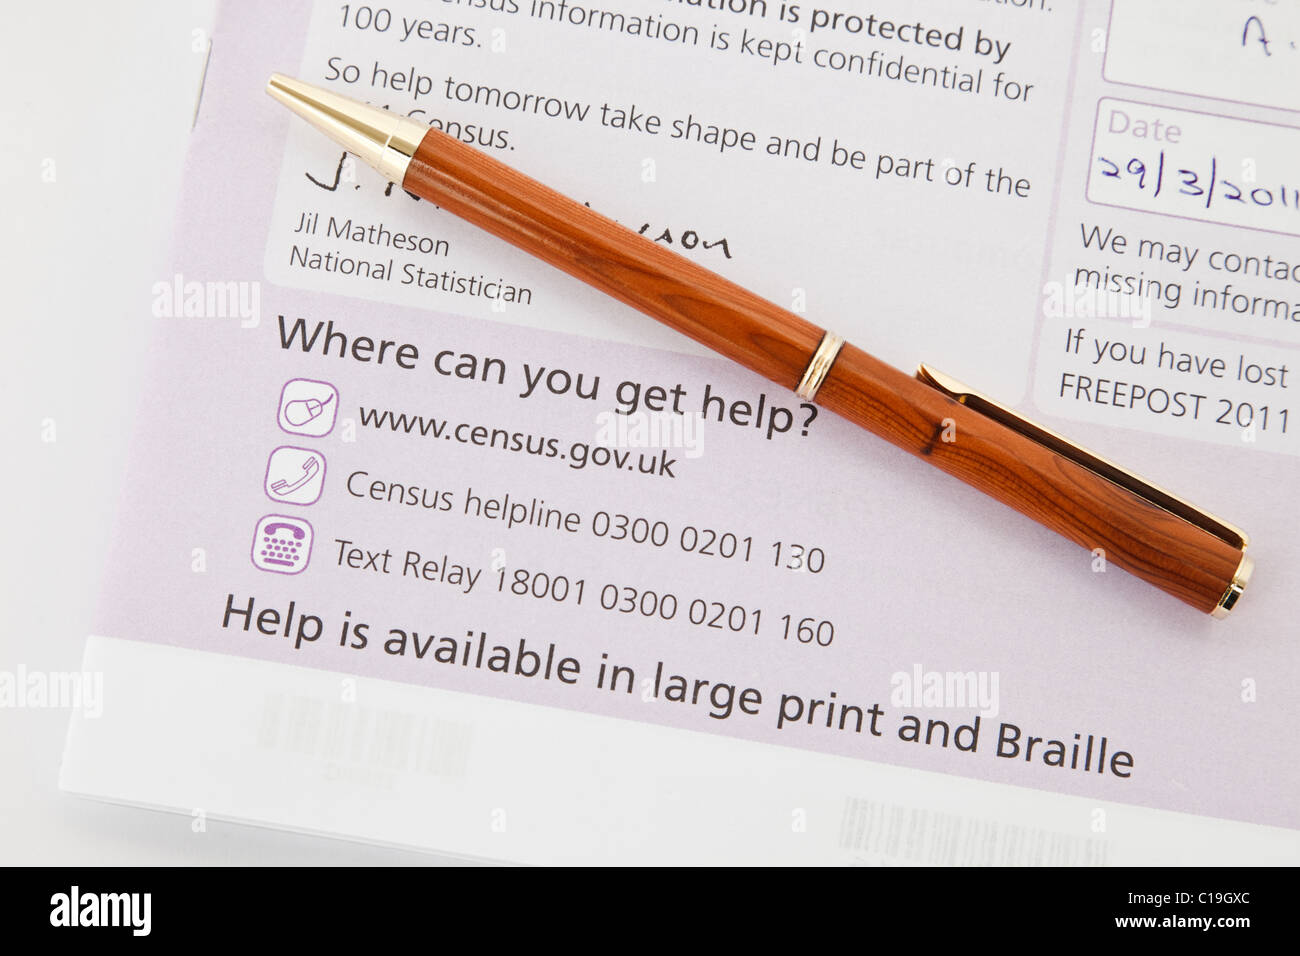 Wales, UK, Europe. Pen and 2011 Household Questionnaire form showing where to get help Stock Photo